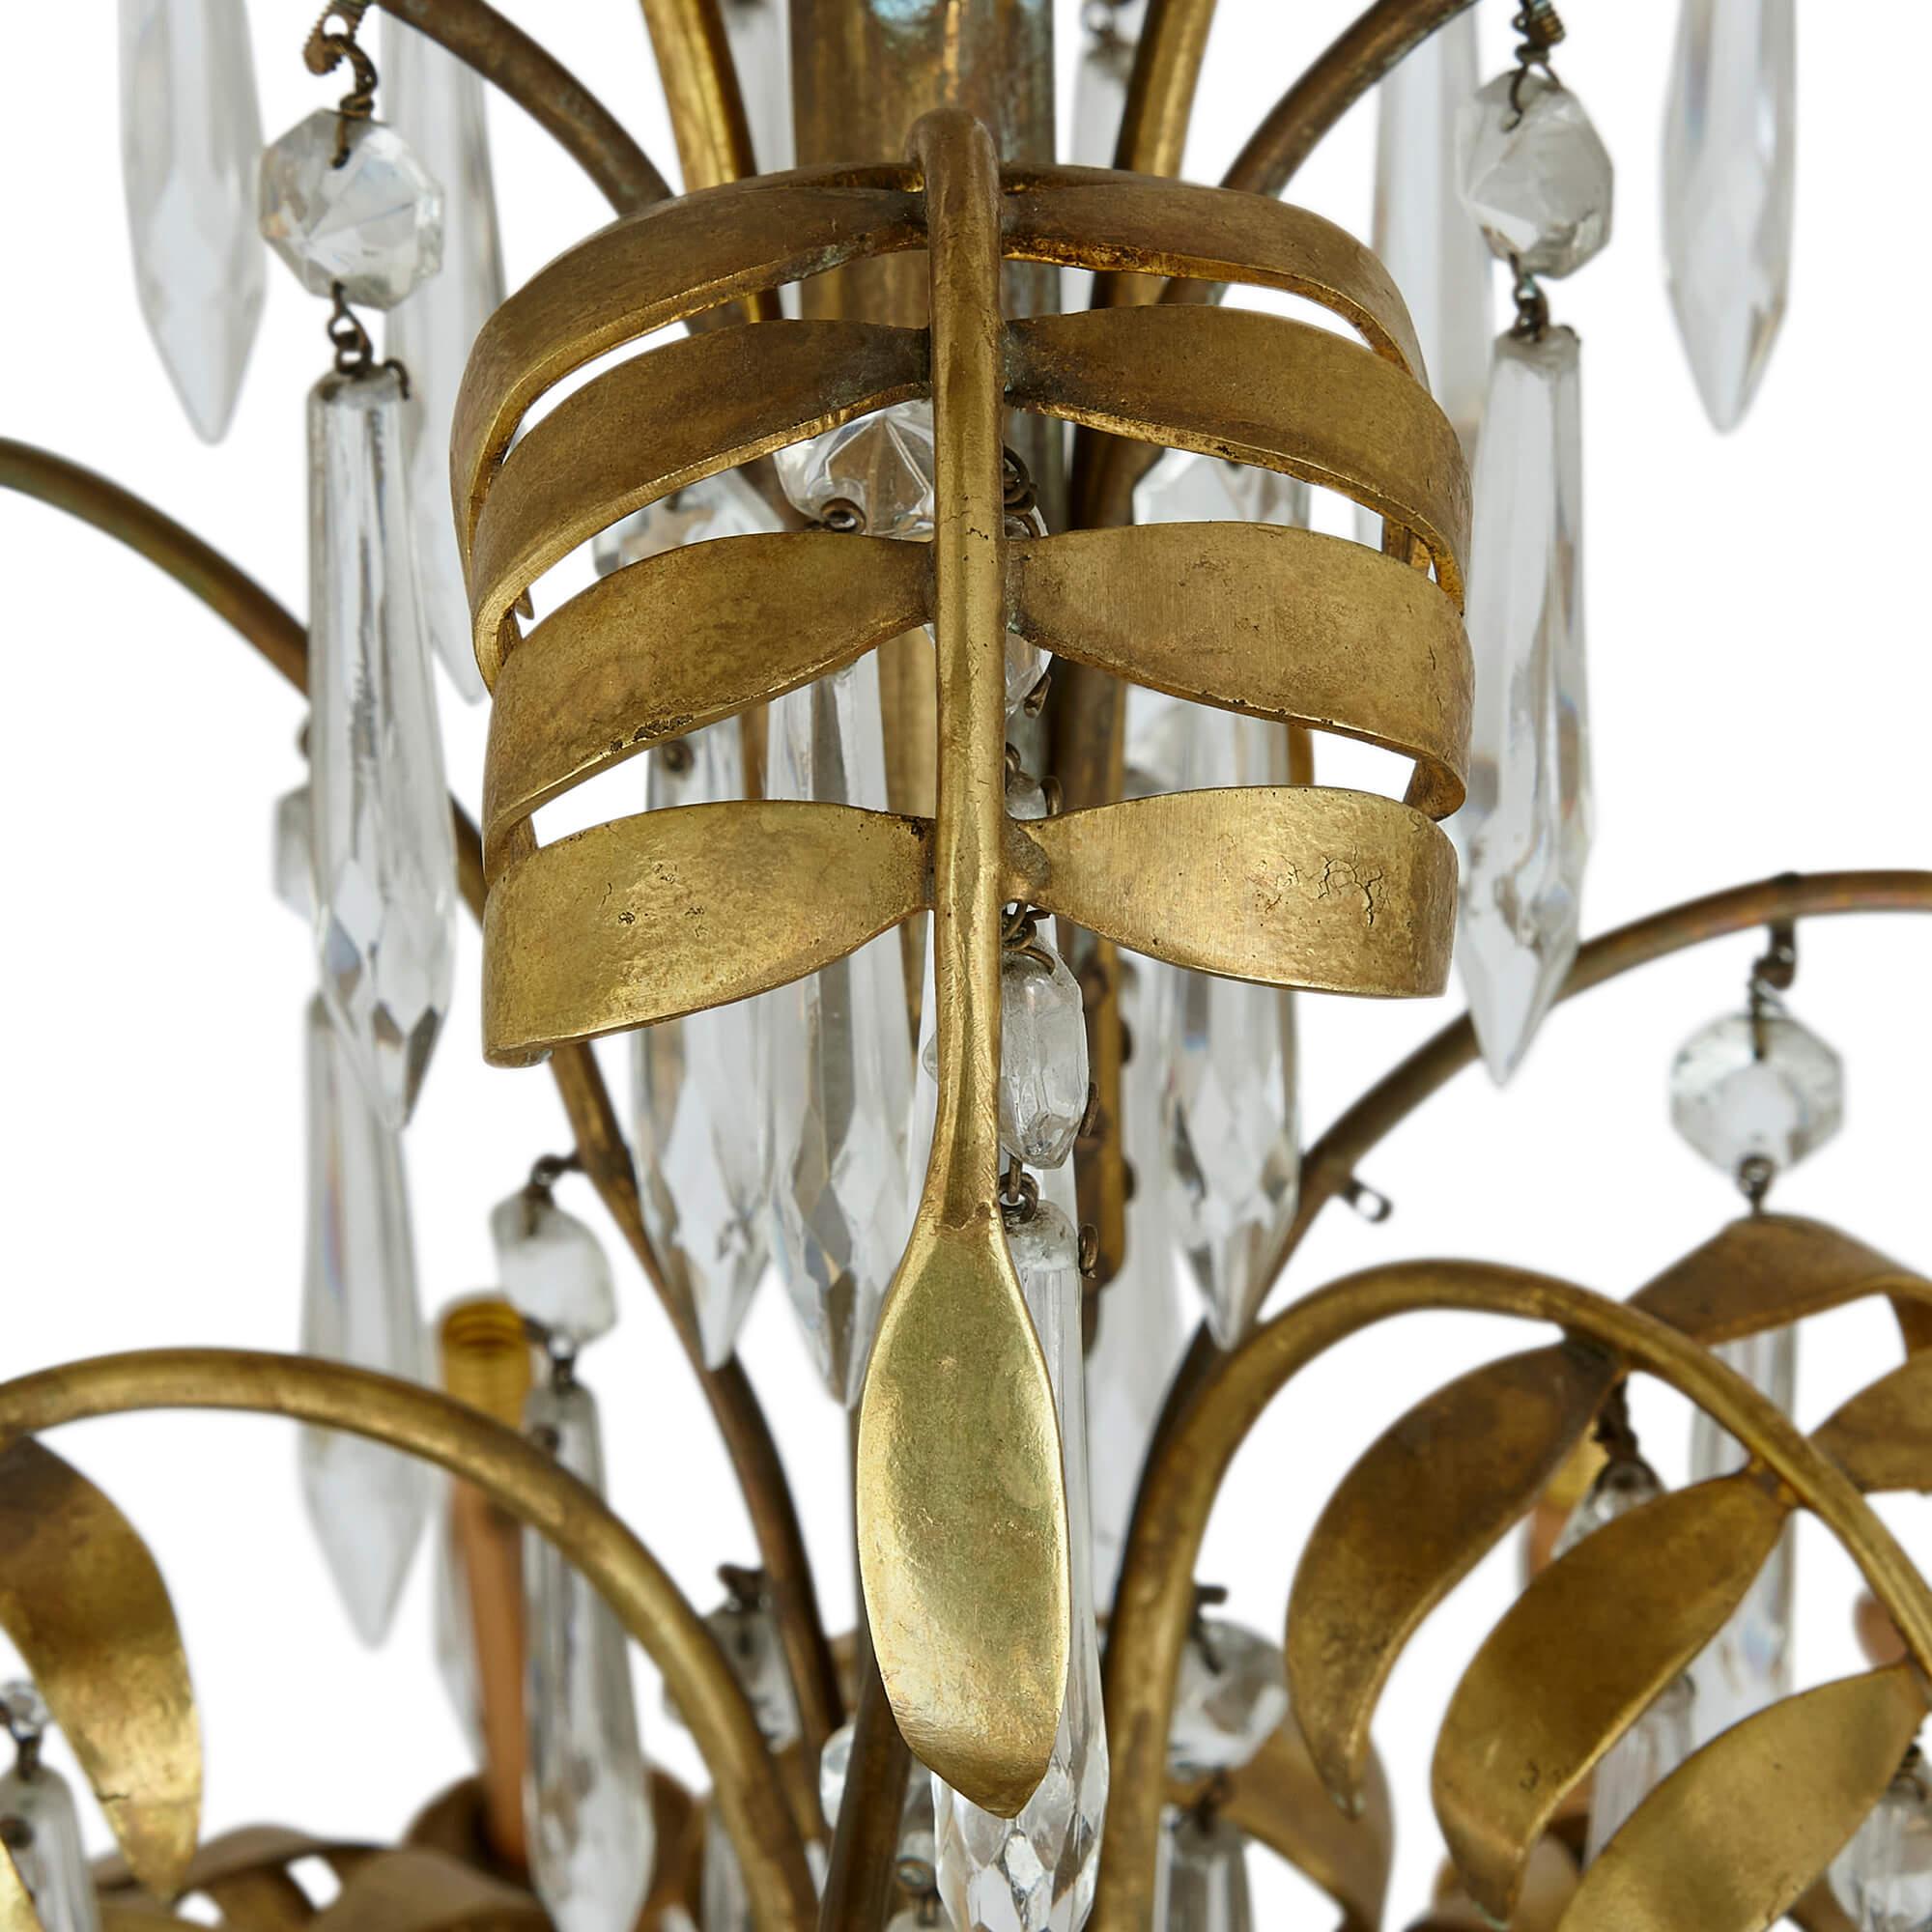 Antique French clear cut glass and ormolu twelve-light chandelier
French, c. 1880 
Height 115cm, diameter 75cm

This eye-catching chandelier was crafted in France in the late 19th century. Its splendid shape and decoration are made from ormolu and